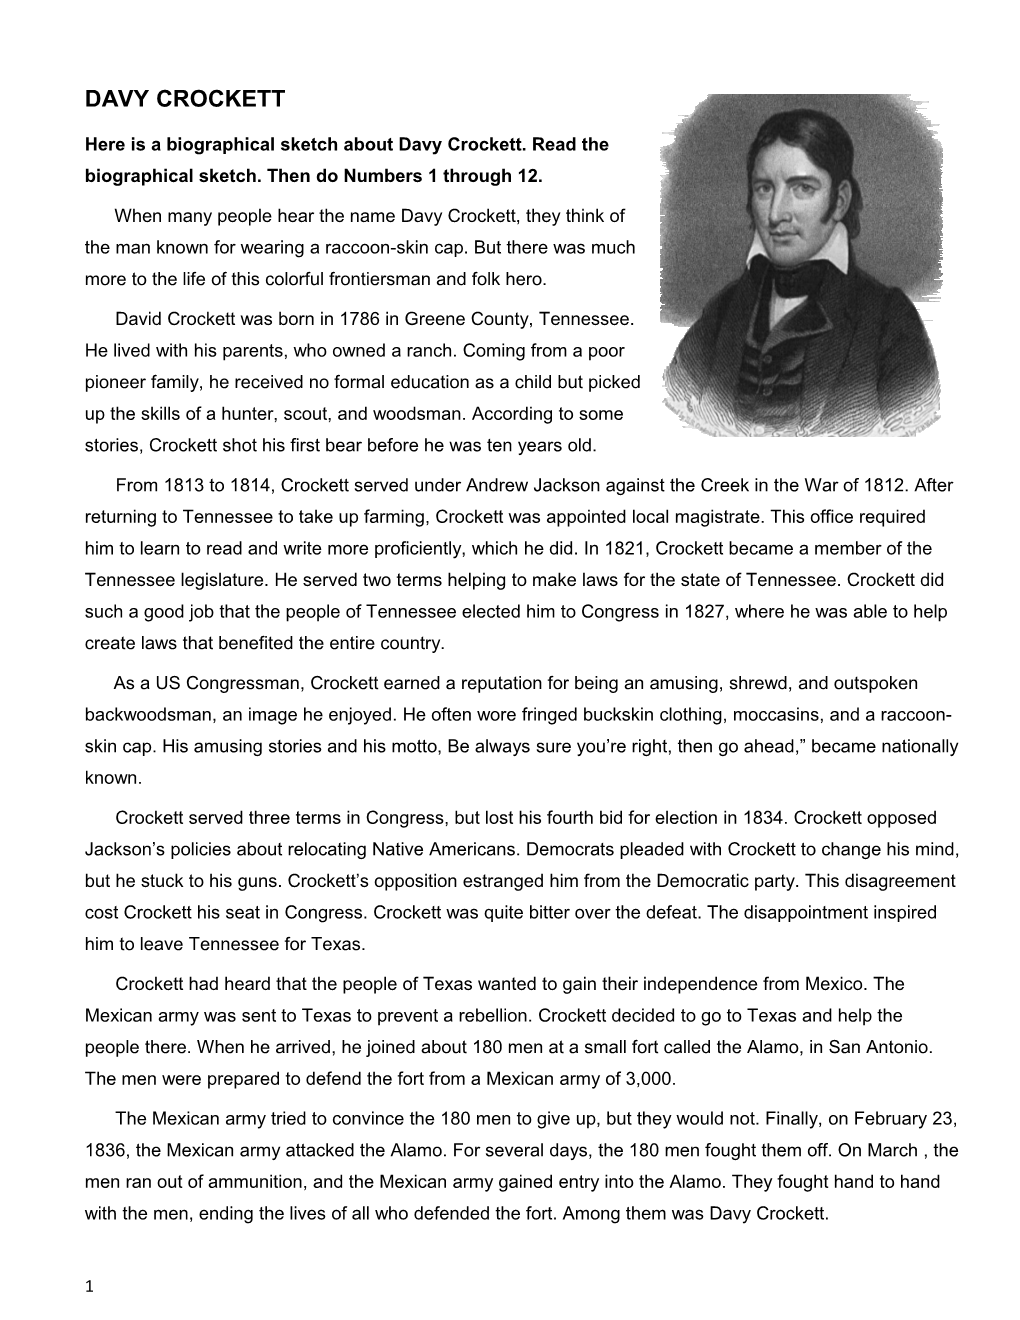 Here Is a Biographical Sketch About Davy Crockett. Read the Biographical Sketch. Then